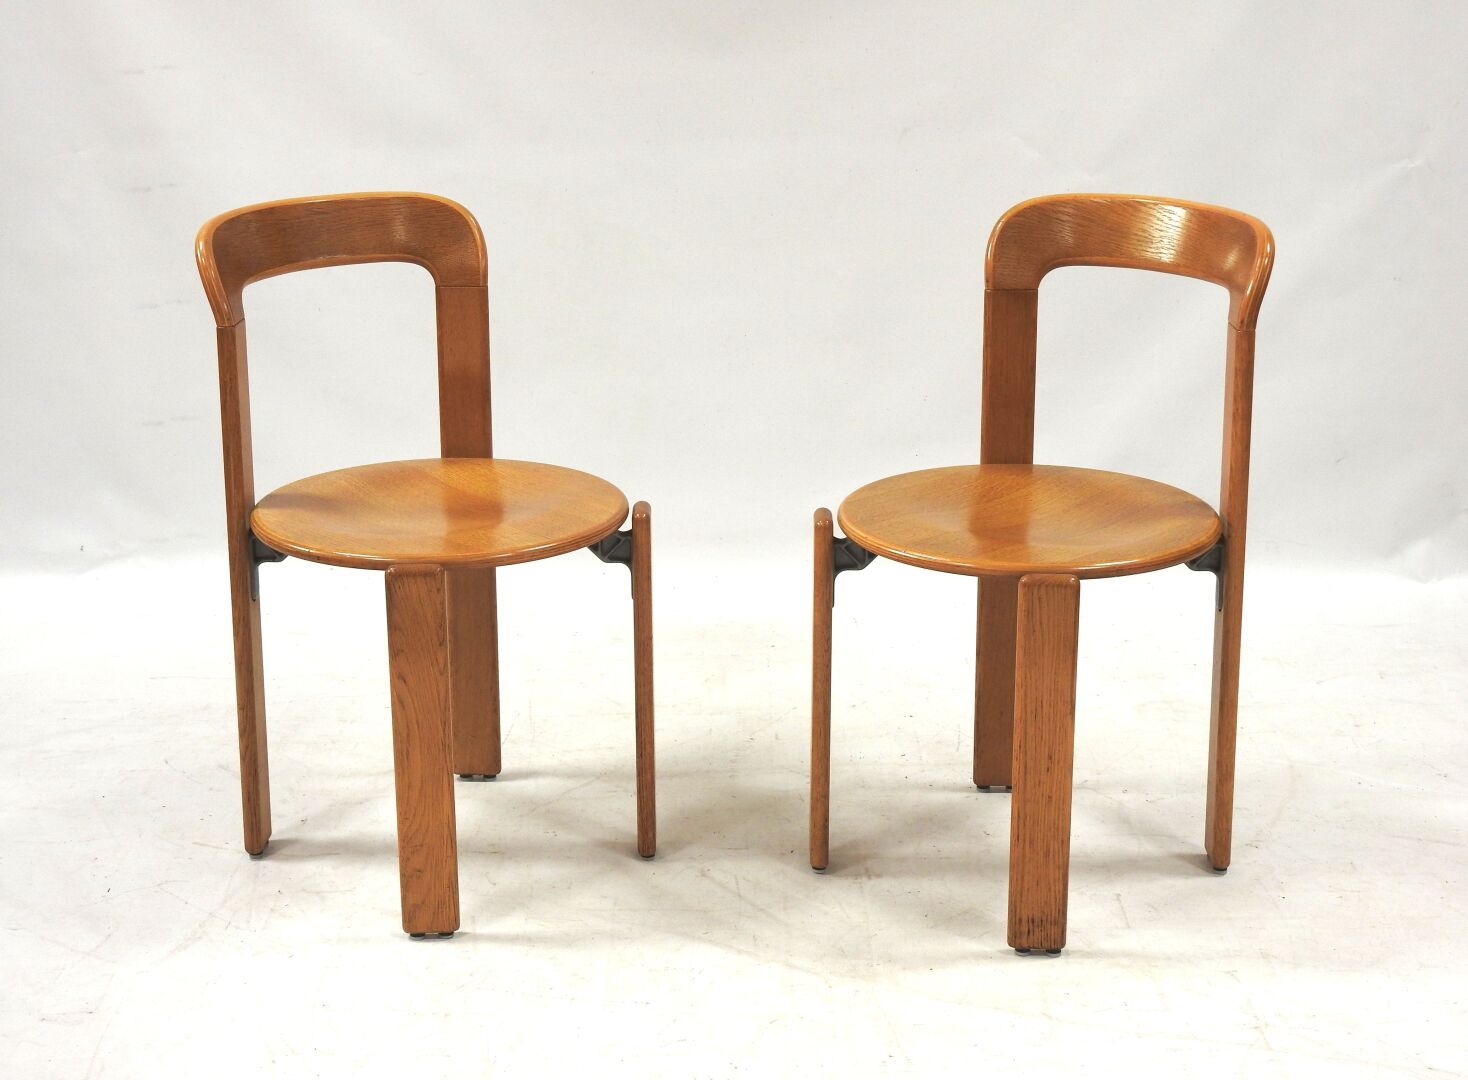 Null Bruno REY (b. 1935) - Dietiker 1970s edition
Pair of stacking chairs in nat&hellip;